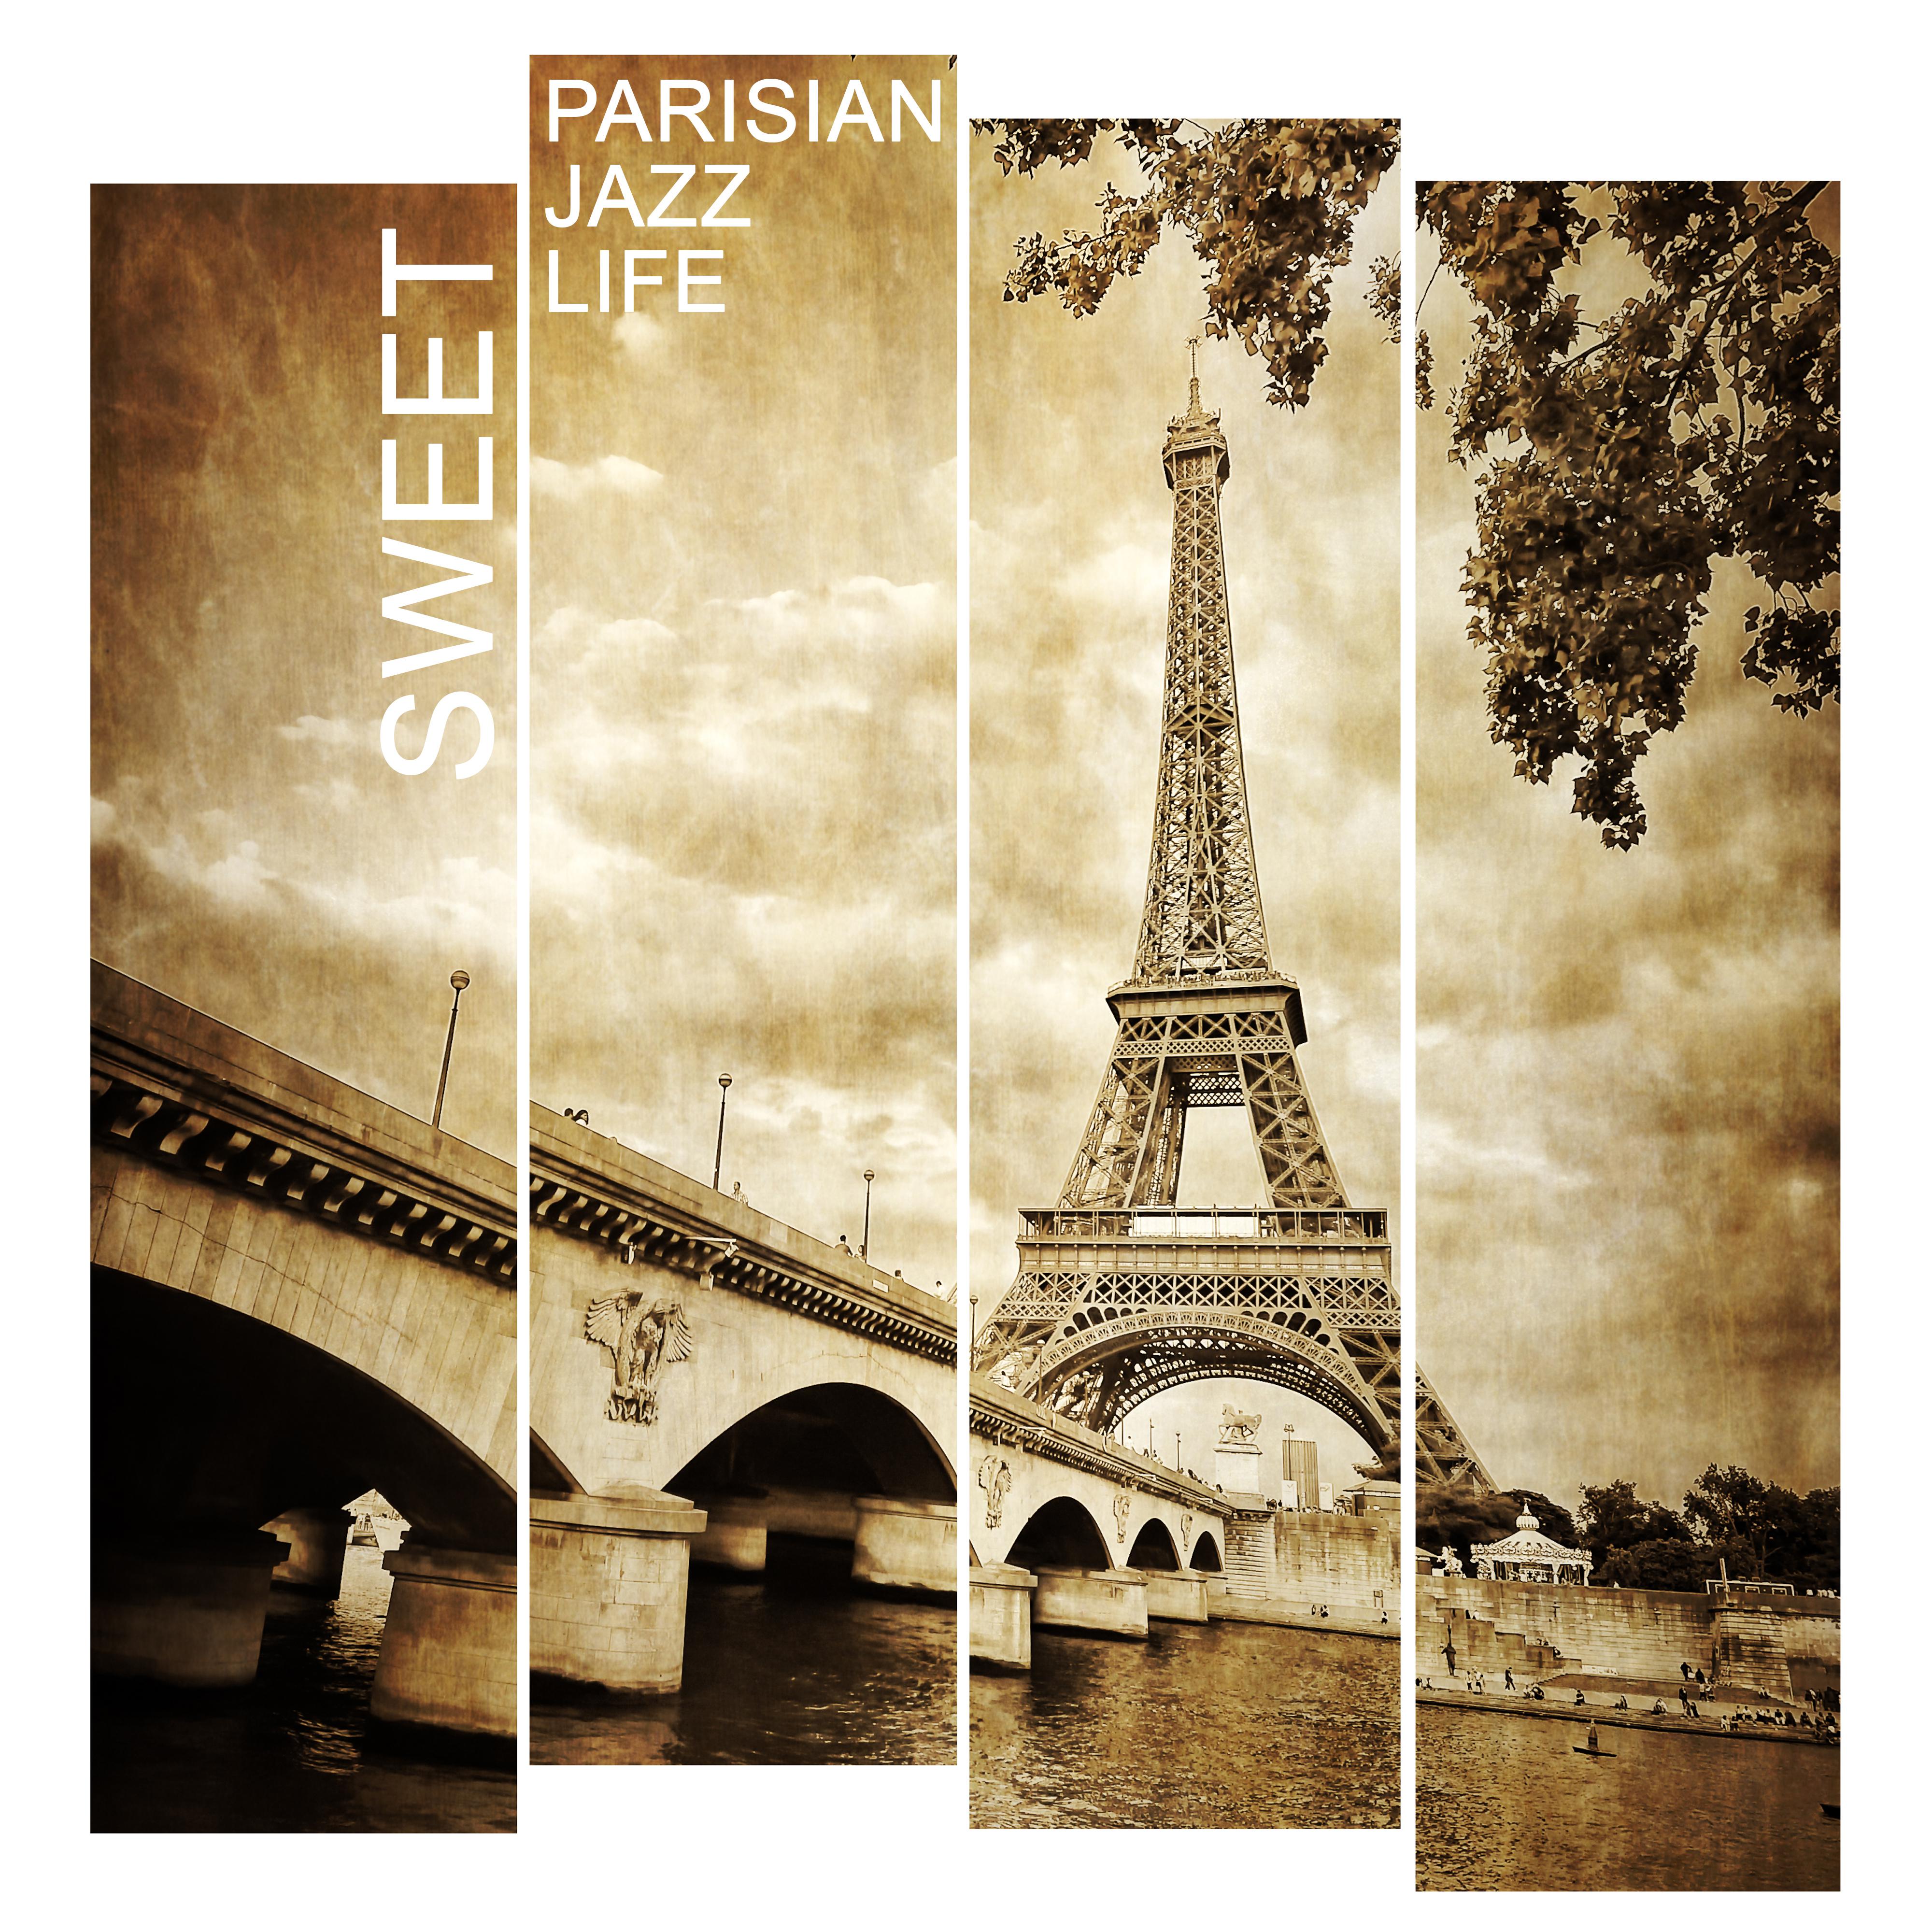 Sweet Parisian Jazz Life: Instrumental Smooth Jazz 2019, Light Background Music for Daily Life, Vintage Melodies, Soft Sounds of Piano, Trumpet & Other